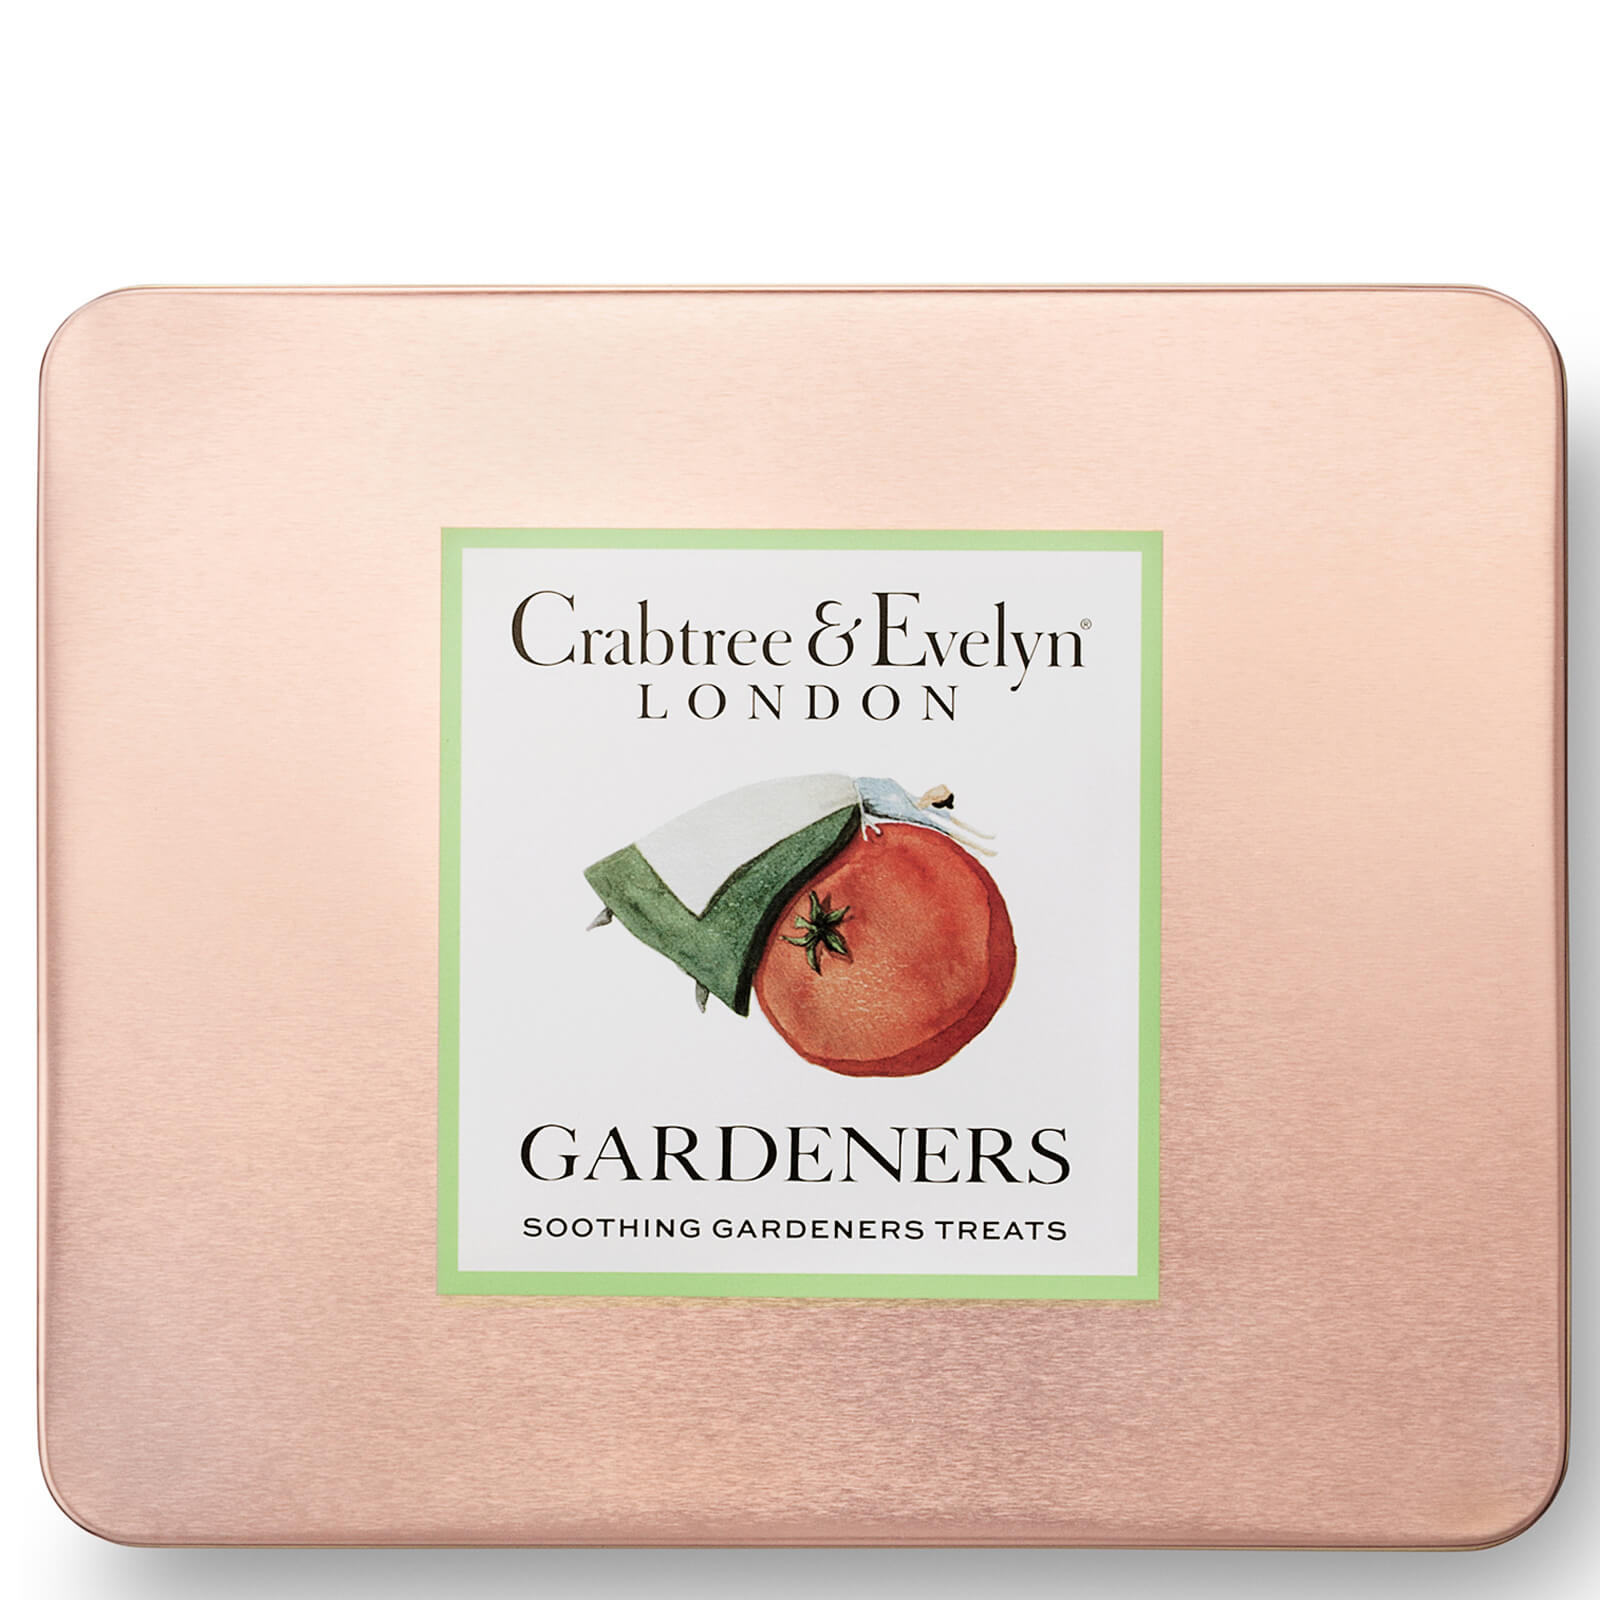 Crabtree & Evelyn Gardeners Soothing Treats